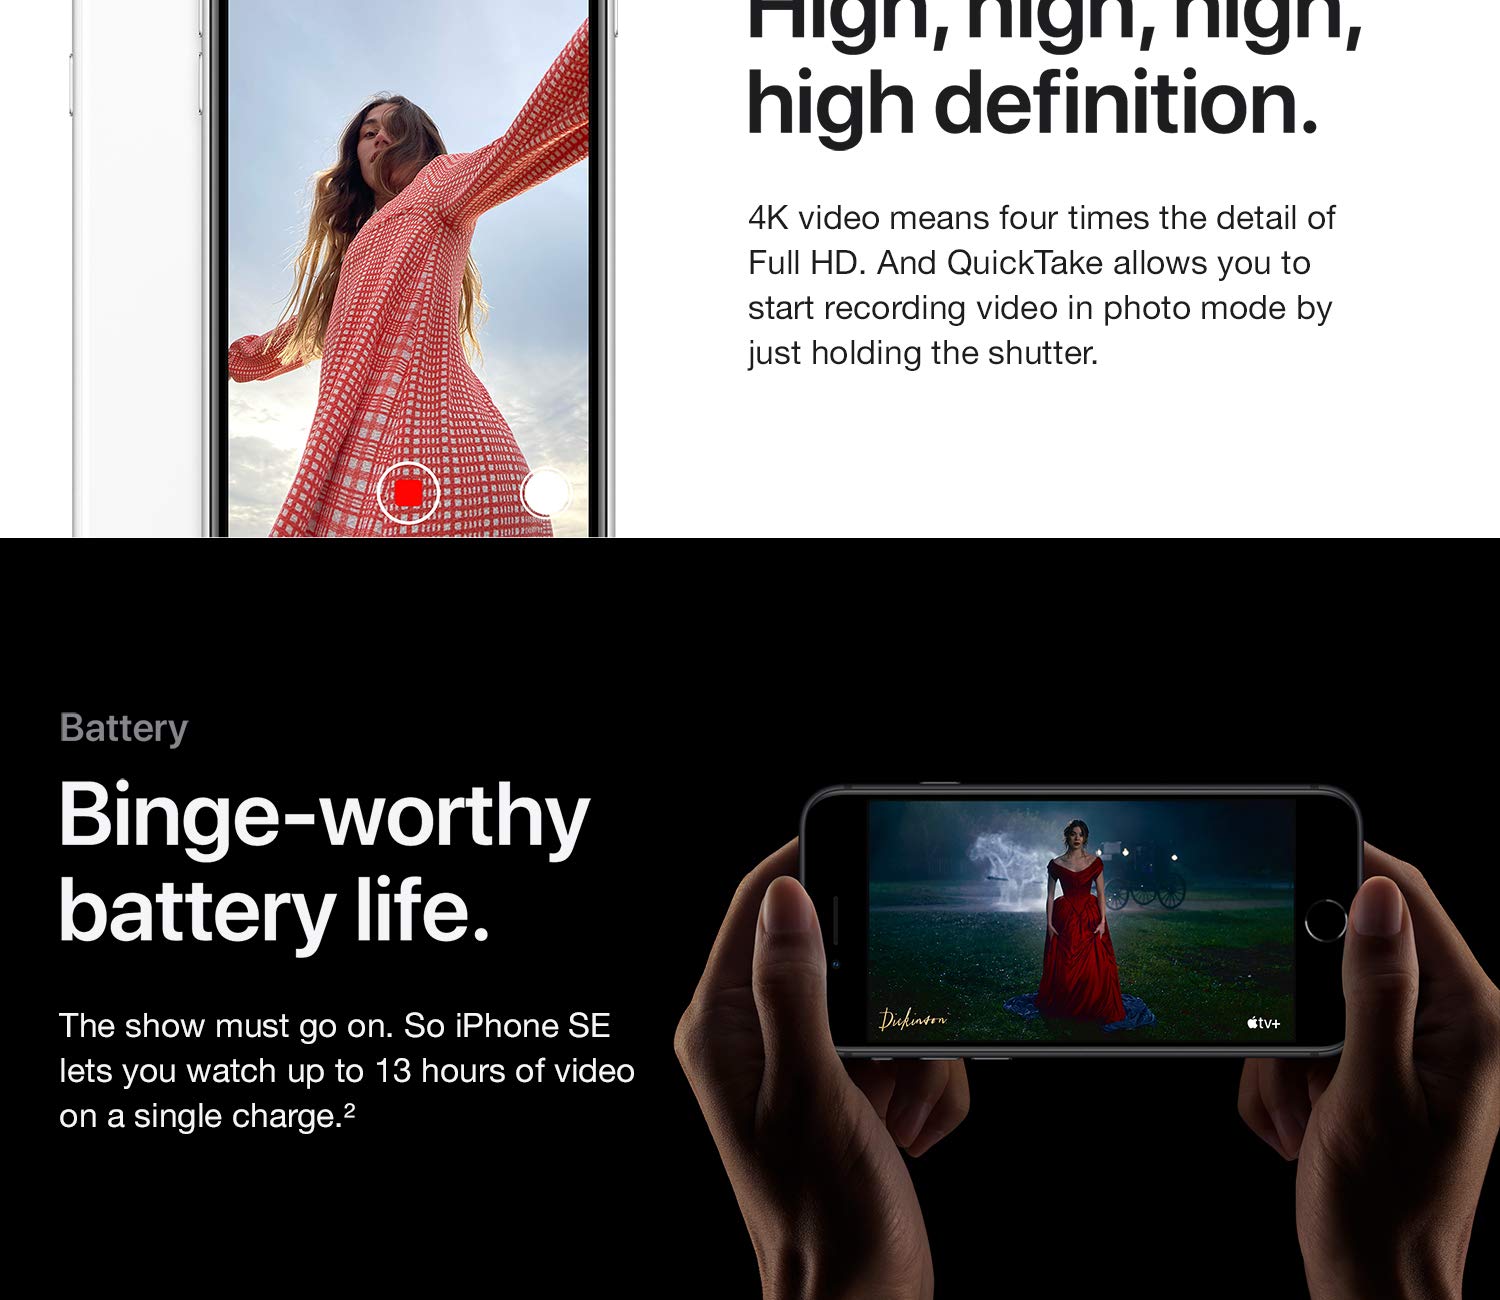 Video. High, Definition. 4K Video Means Four Times The Detail Of Full Hd. And Quicktake Allows You To Start Recording Video In Photo Mode By Just Holding The Shutter. Batter. Binge-Worthy Battery Life. The Show Must Go On. So Iphone Se Lets You Watch Up To 13 Hours Of Video On A Single Charge.